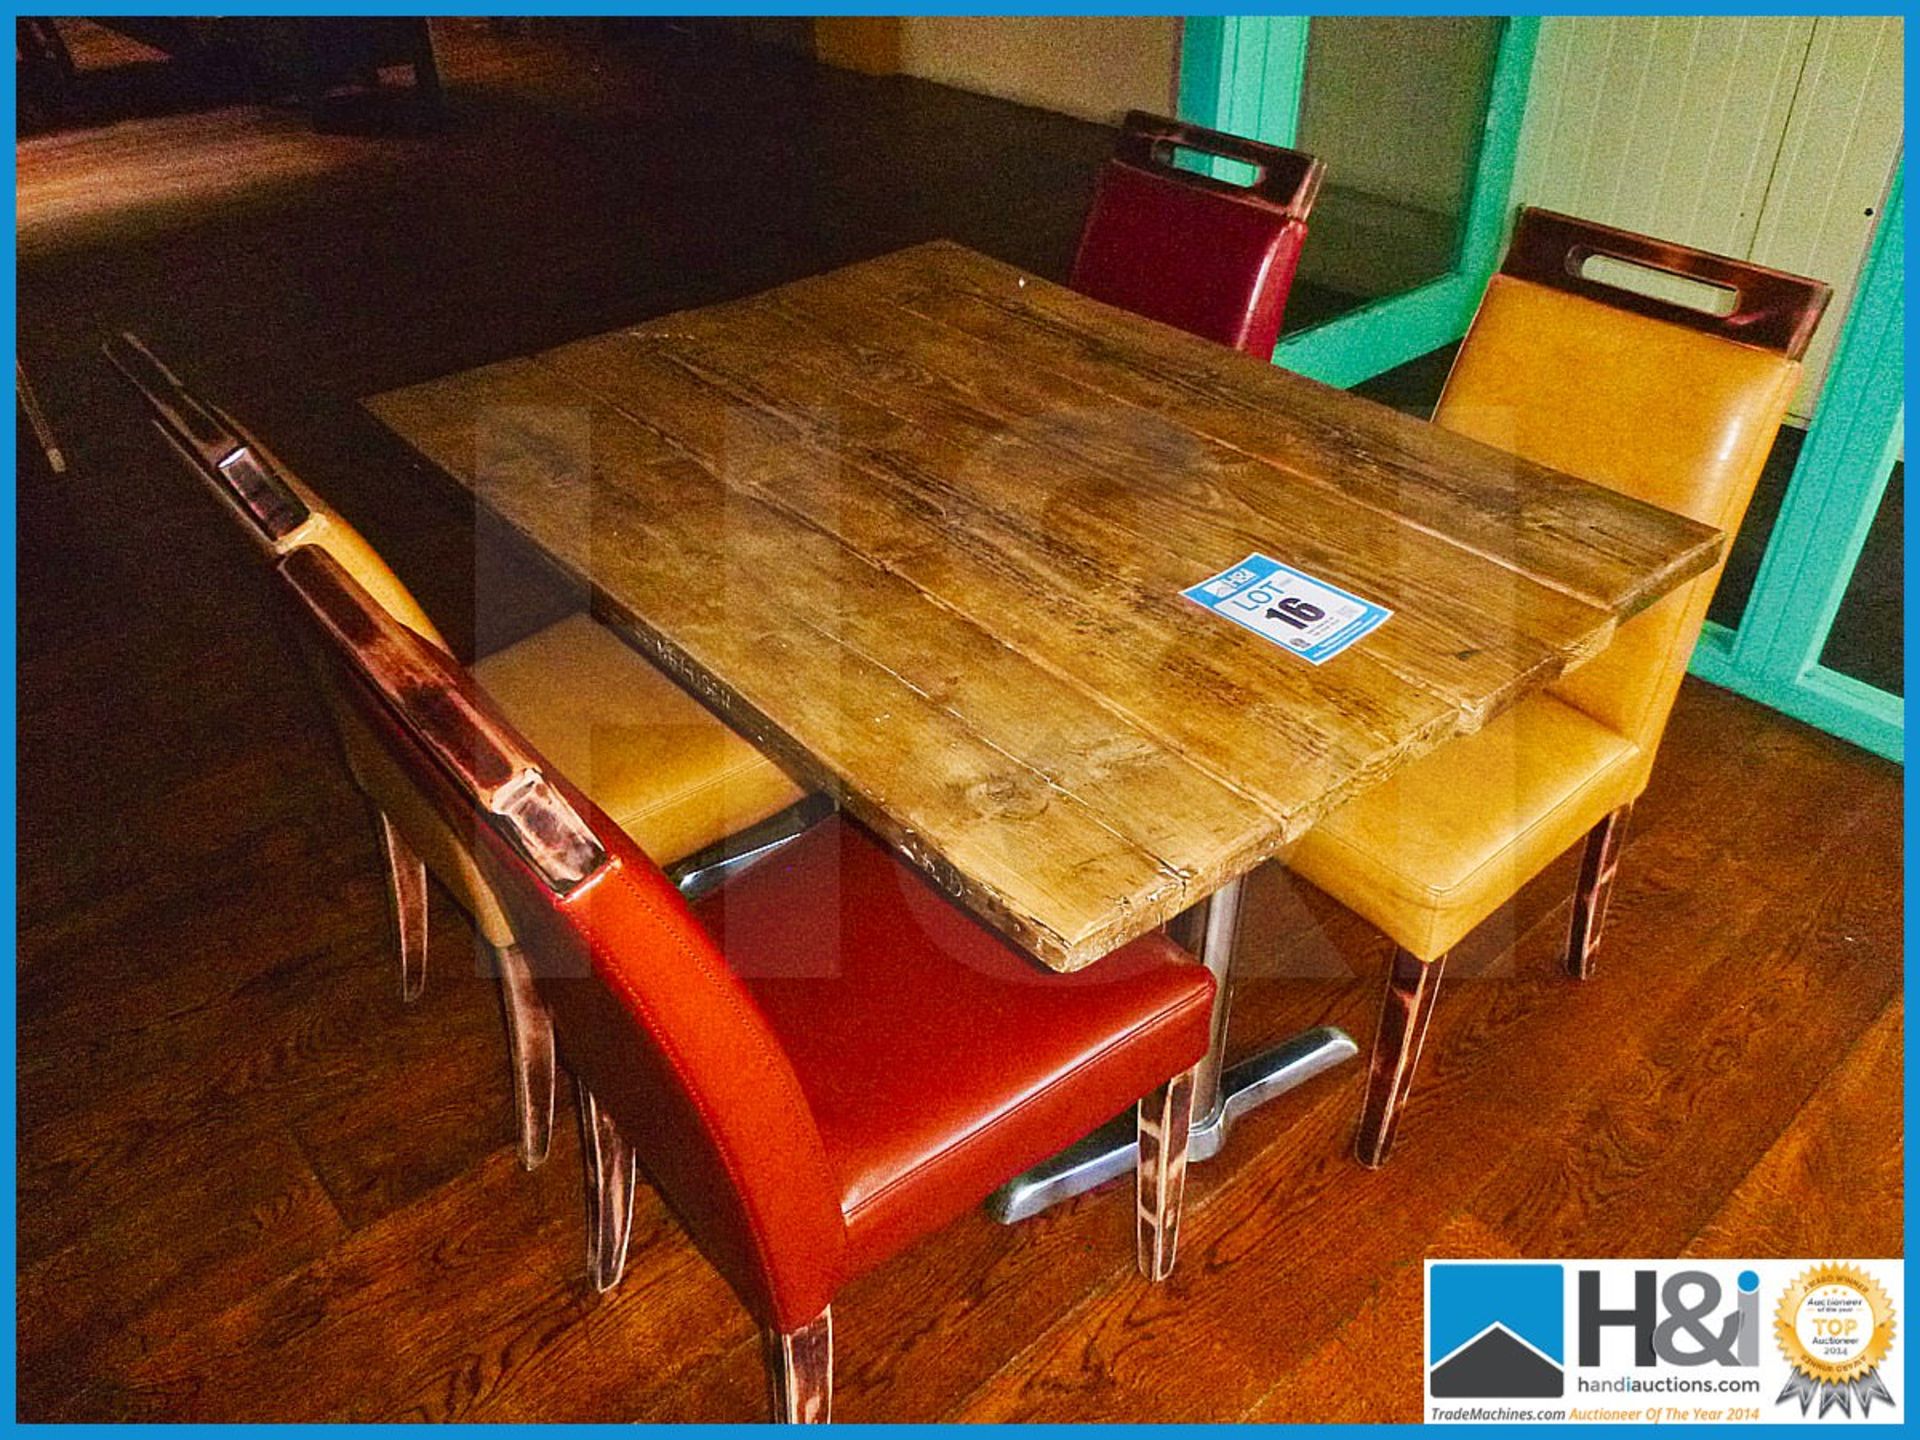 4ft Rustic dining table with metal legs compete with four chairs